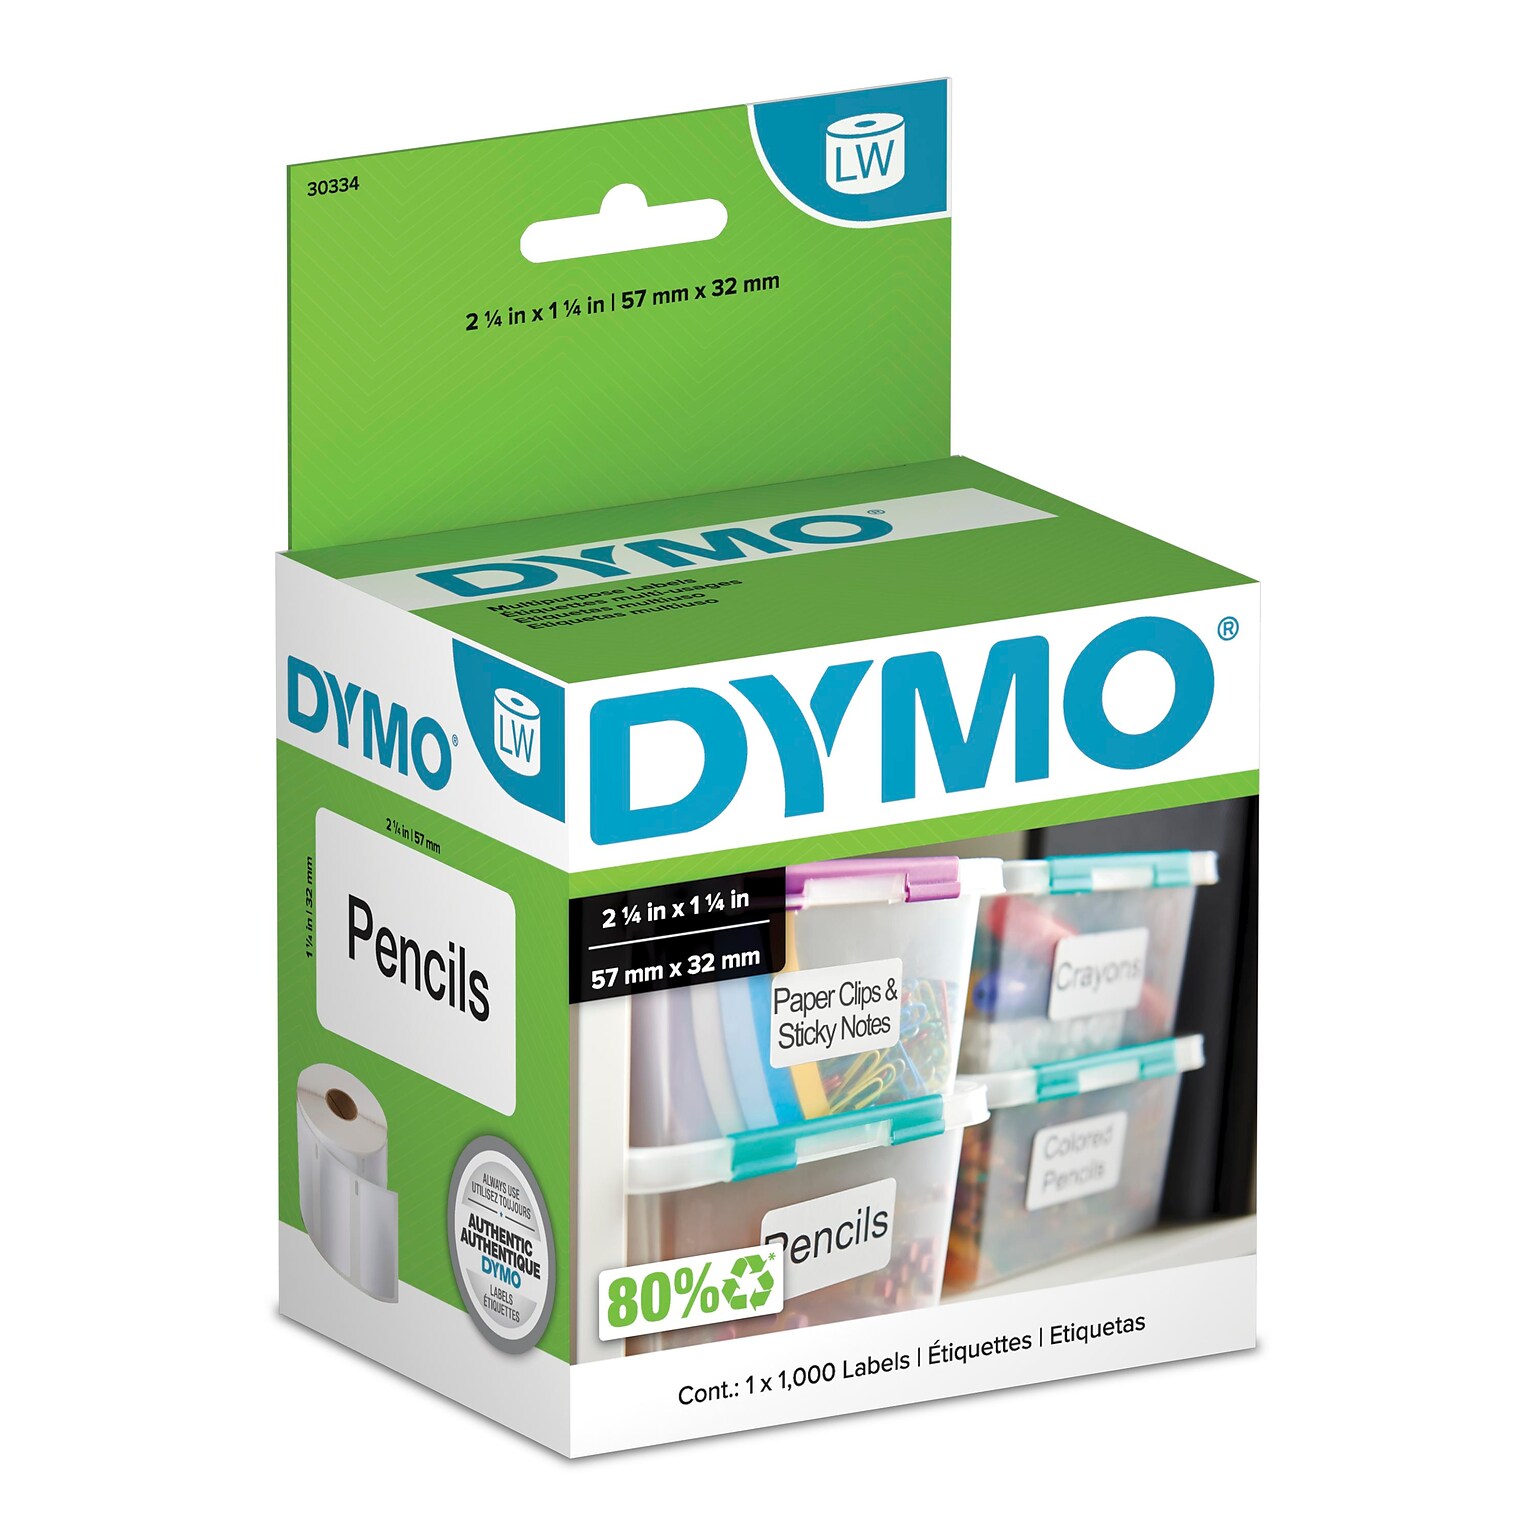 DYMO LabelWriter 30334 Multi-Purpose Labels, 2-1/4 x 1-1/4, Black on White, 1000 Labels/Roll (30334)